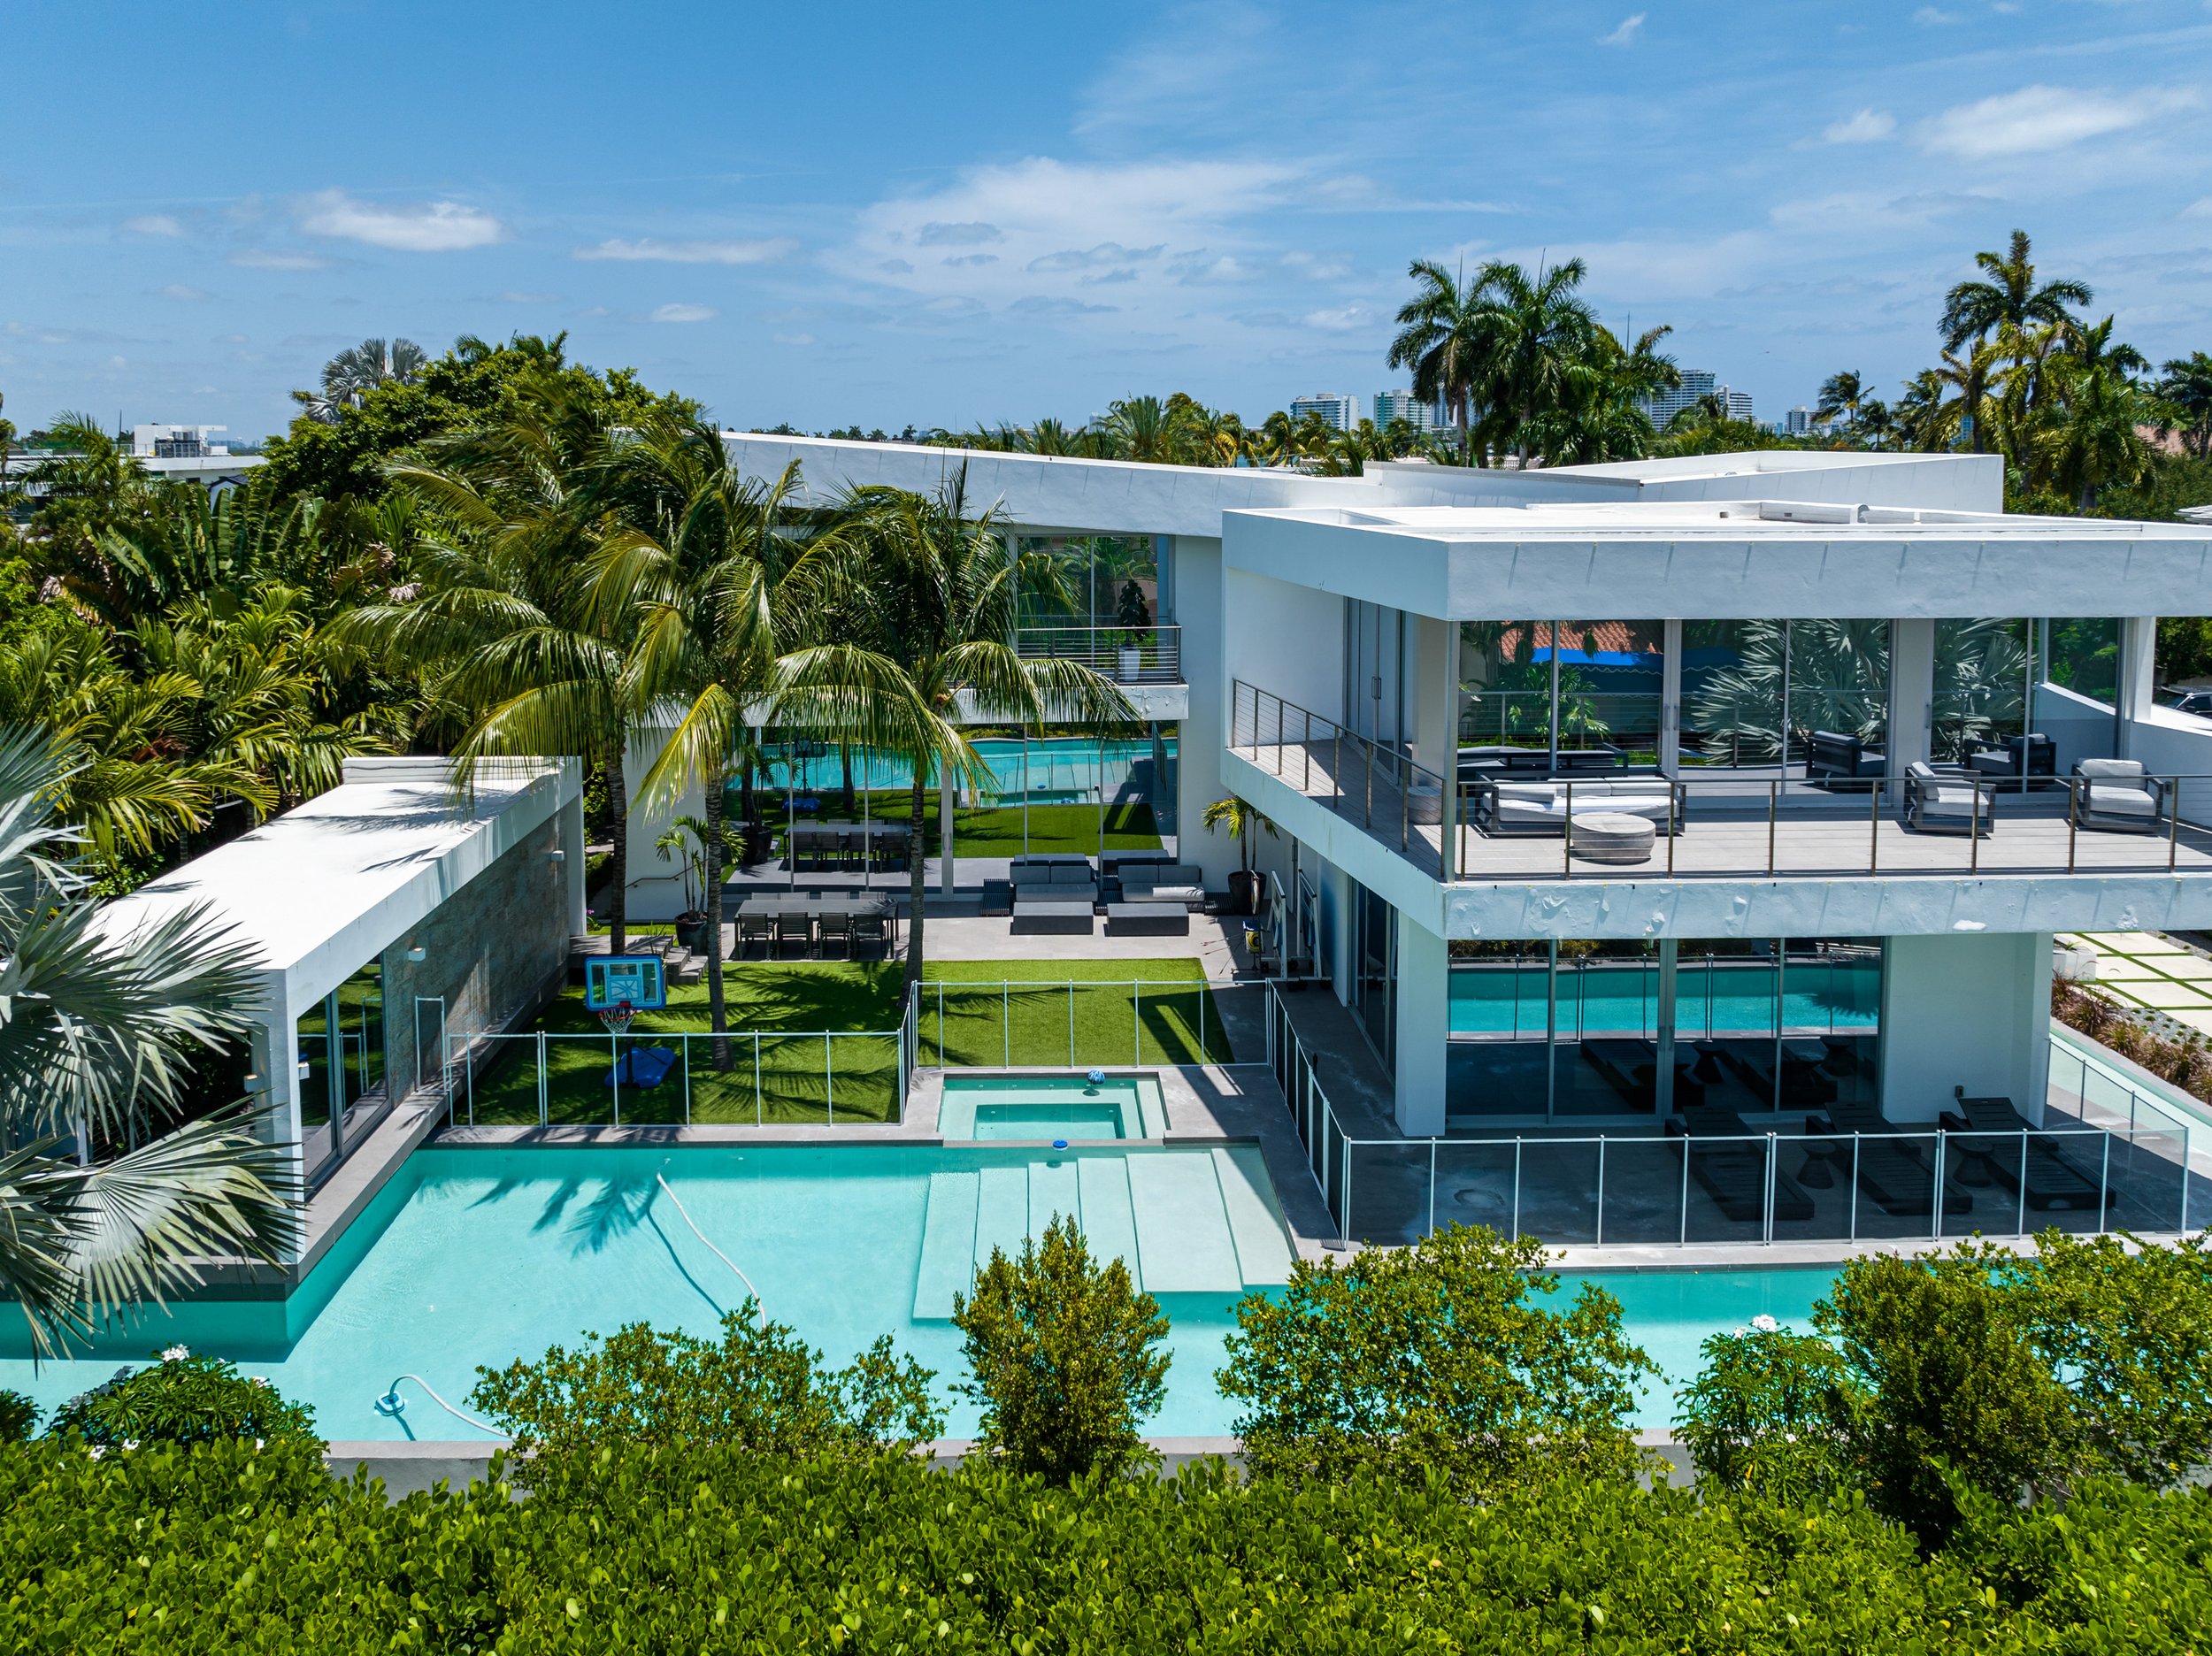 Miami Heat Star Victor Oladipo Lists Hibiscus Island Contemporary For $10 Million Amidst NBA Finals 17.jpg